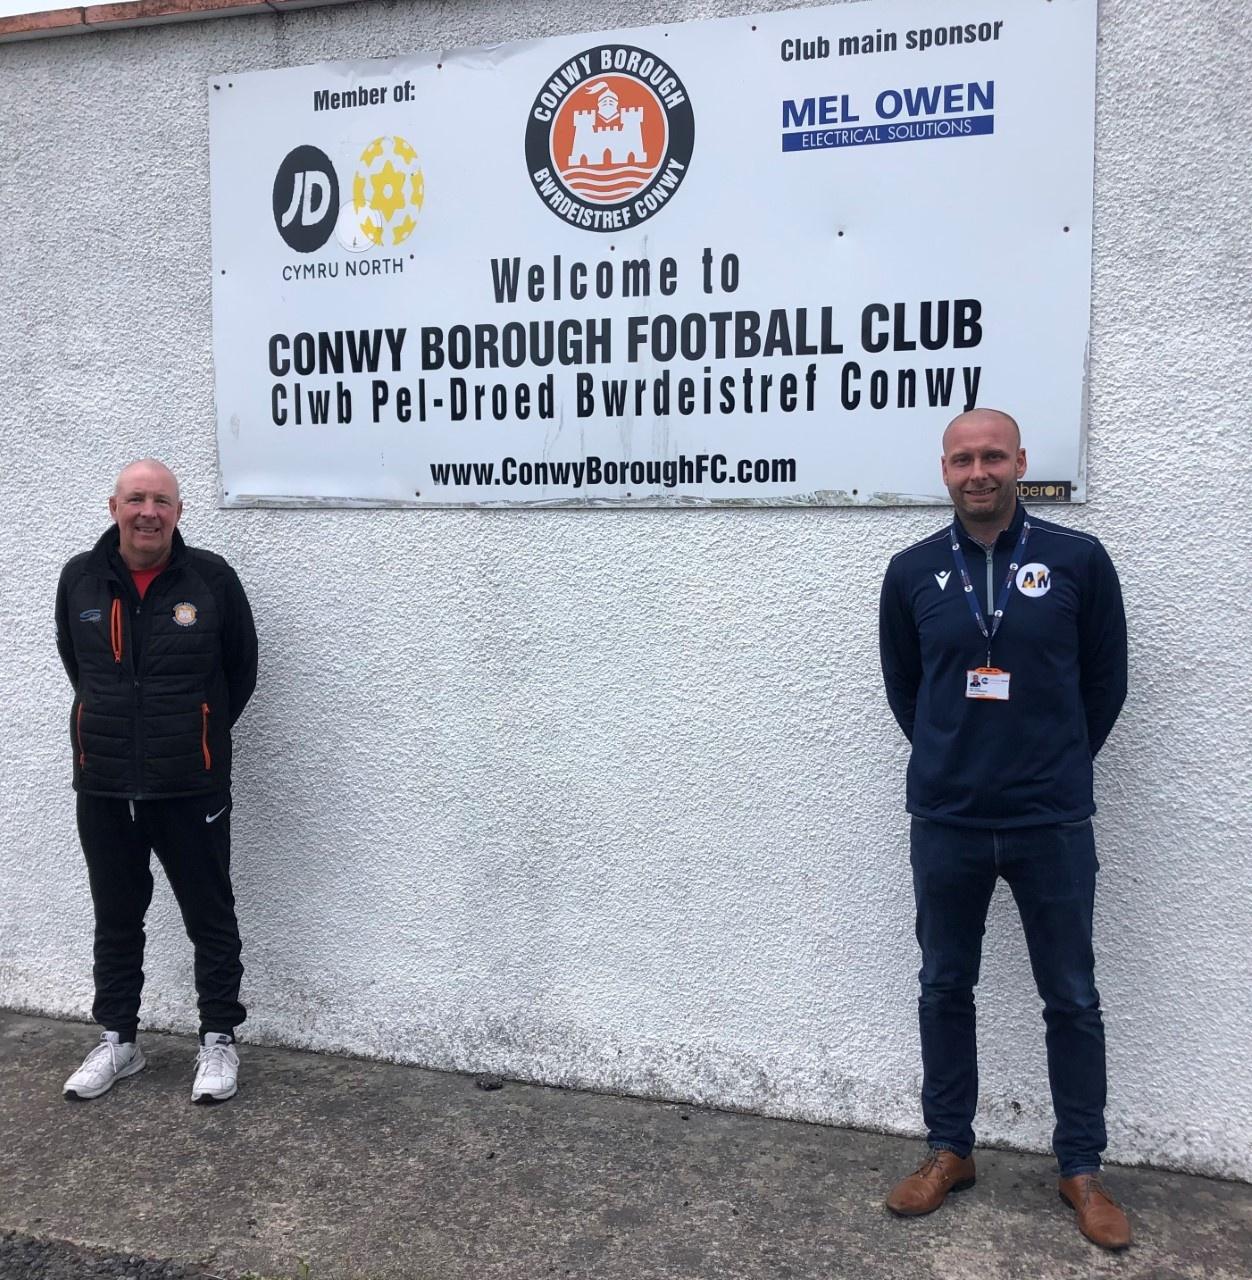 Achieve More with Conwy Borough FC